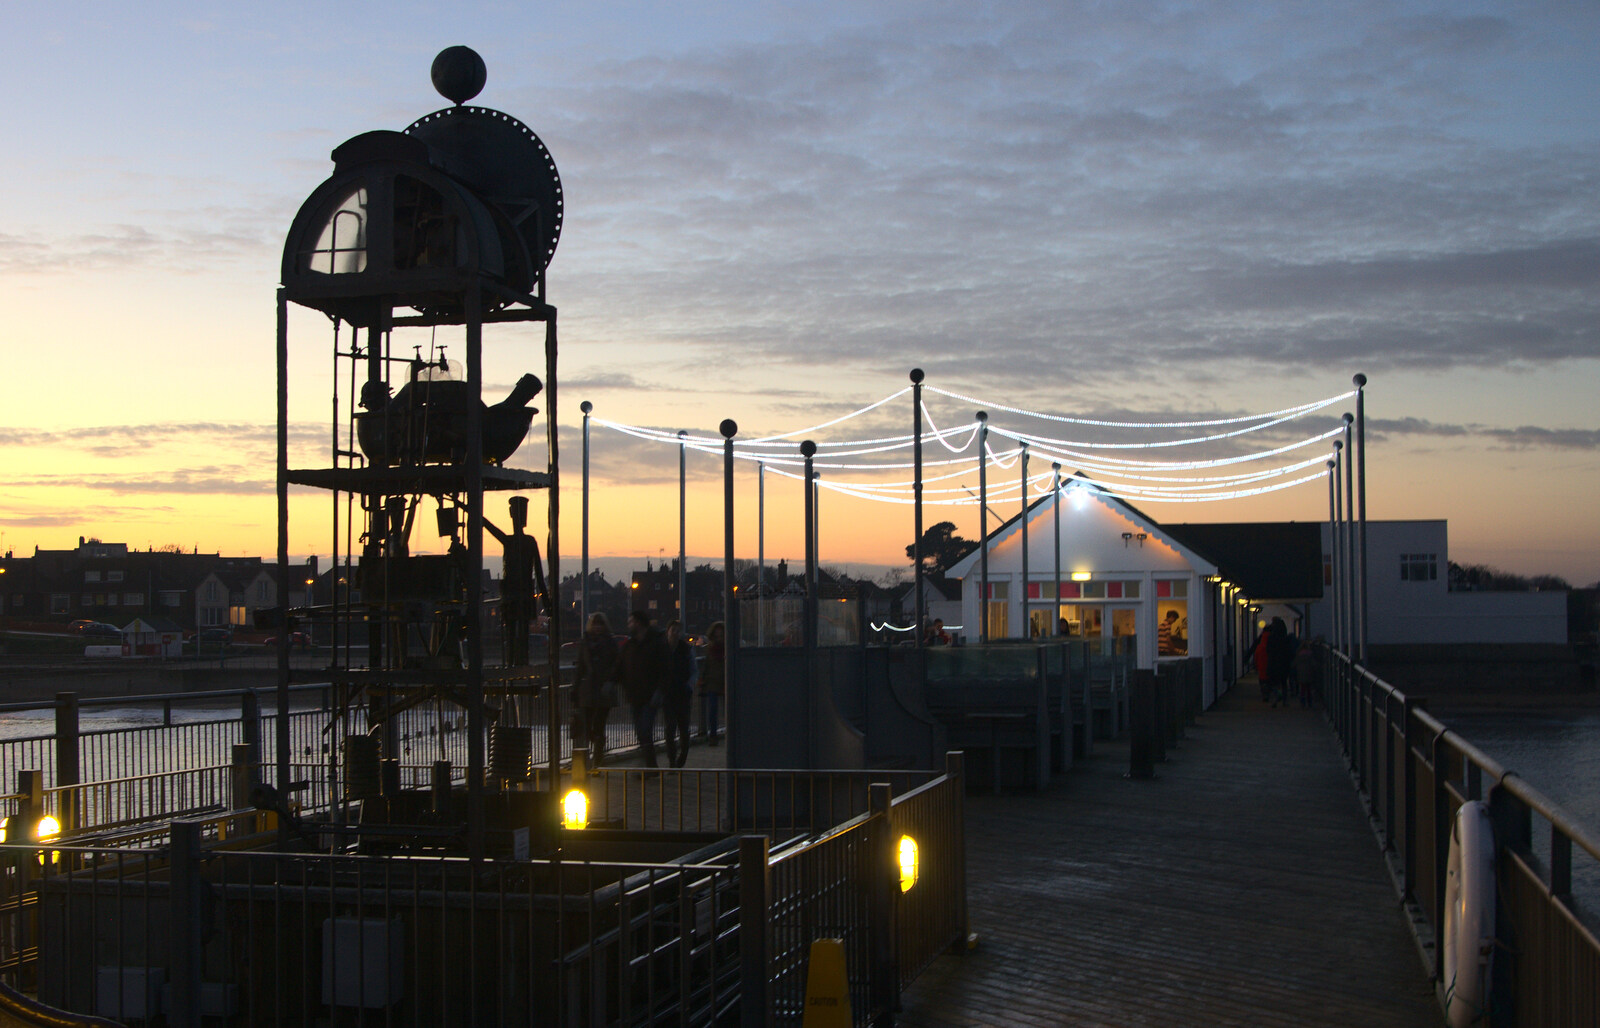 Tim Hunkin's water clock from Sunset on the Beach, Southwold, Suffolk - 30th December 2014